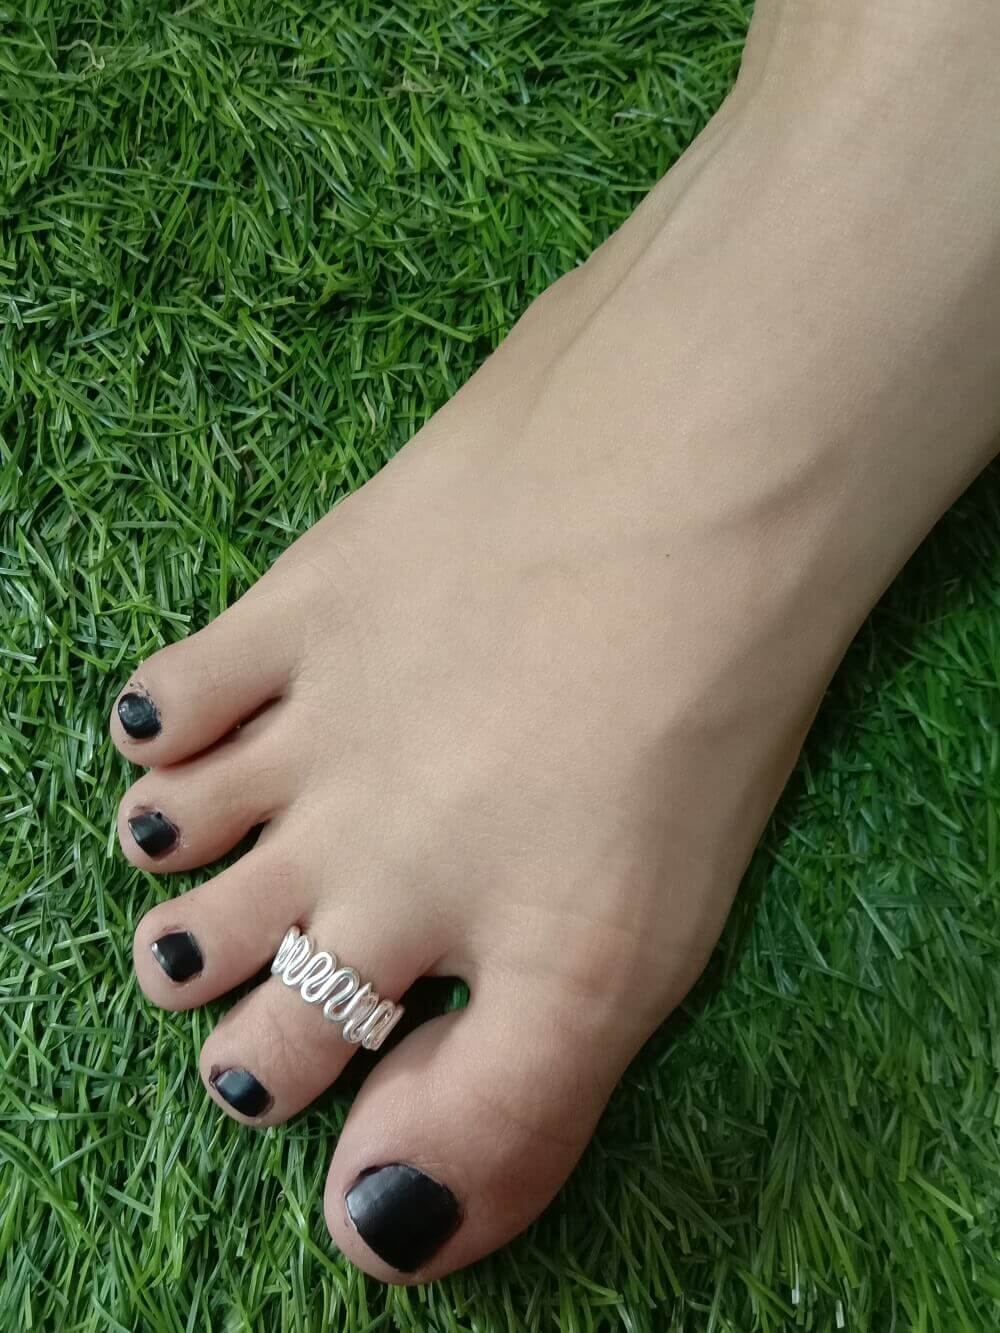 Silver painted toe nails with permanent silver toe rings -Nail Art